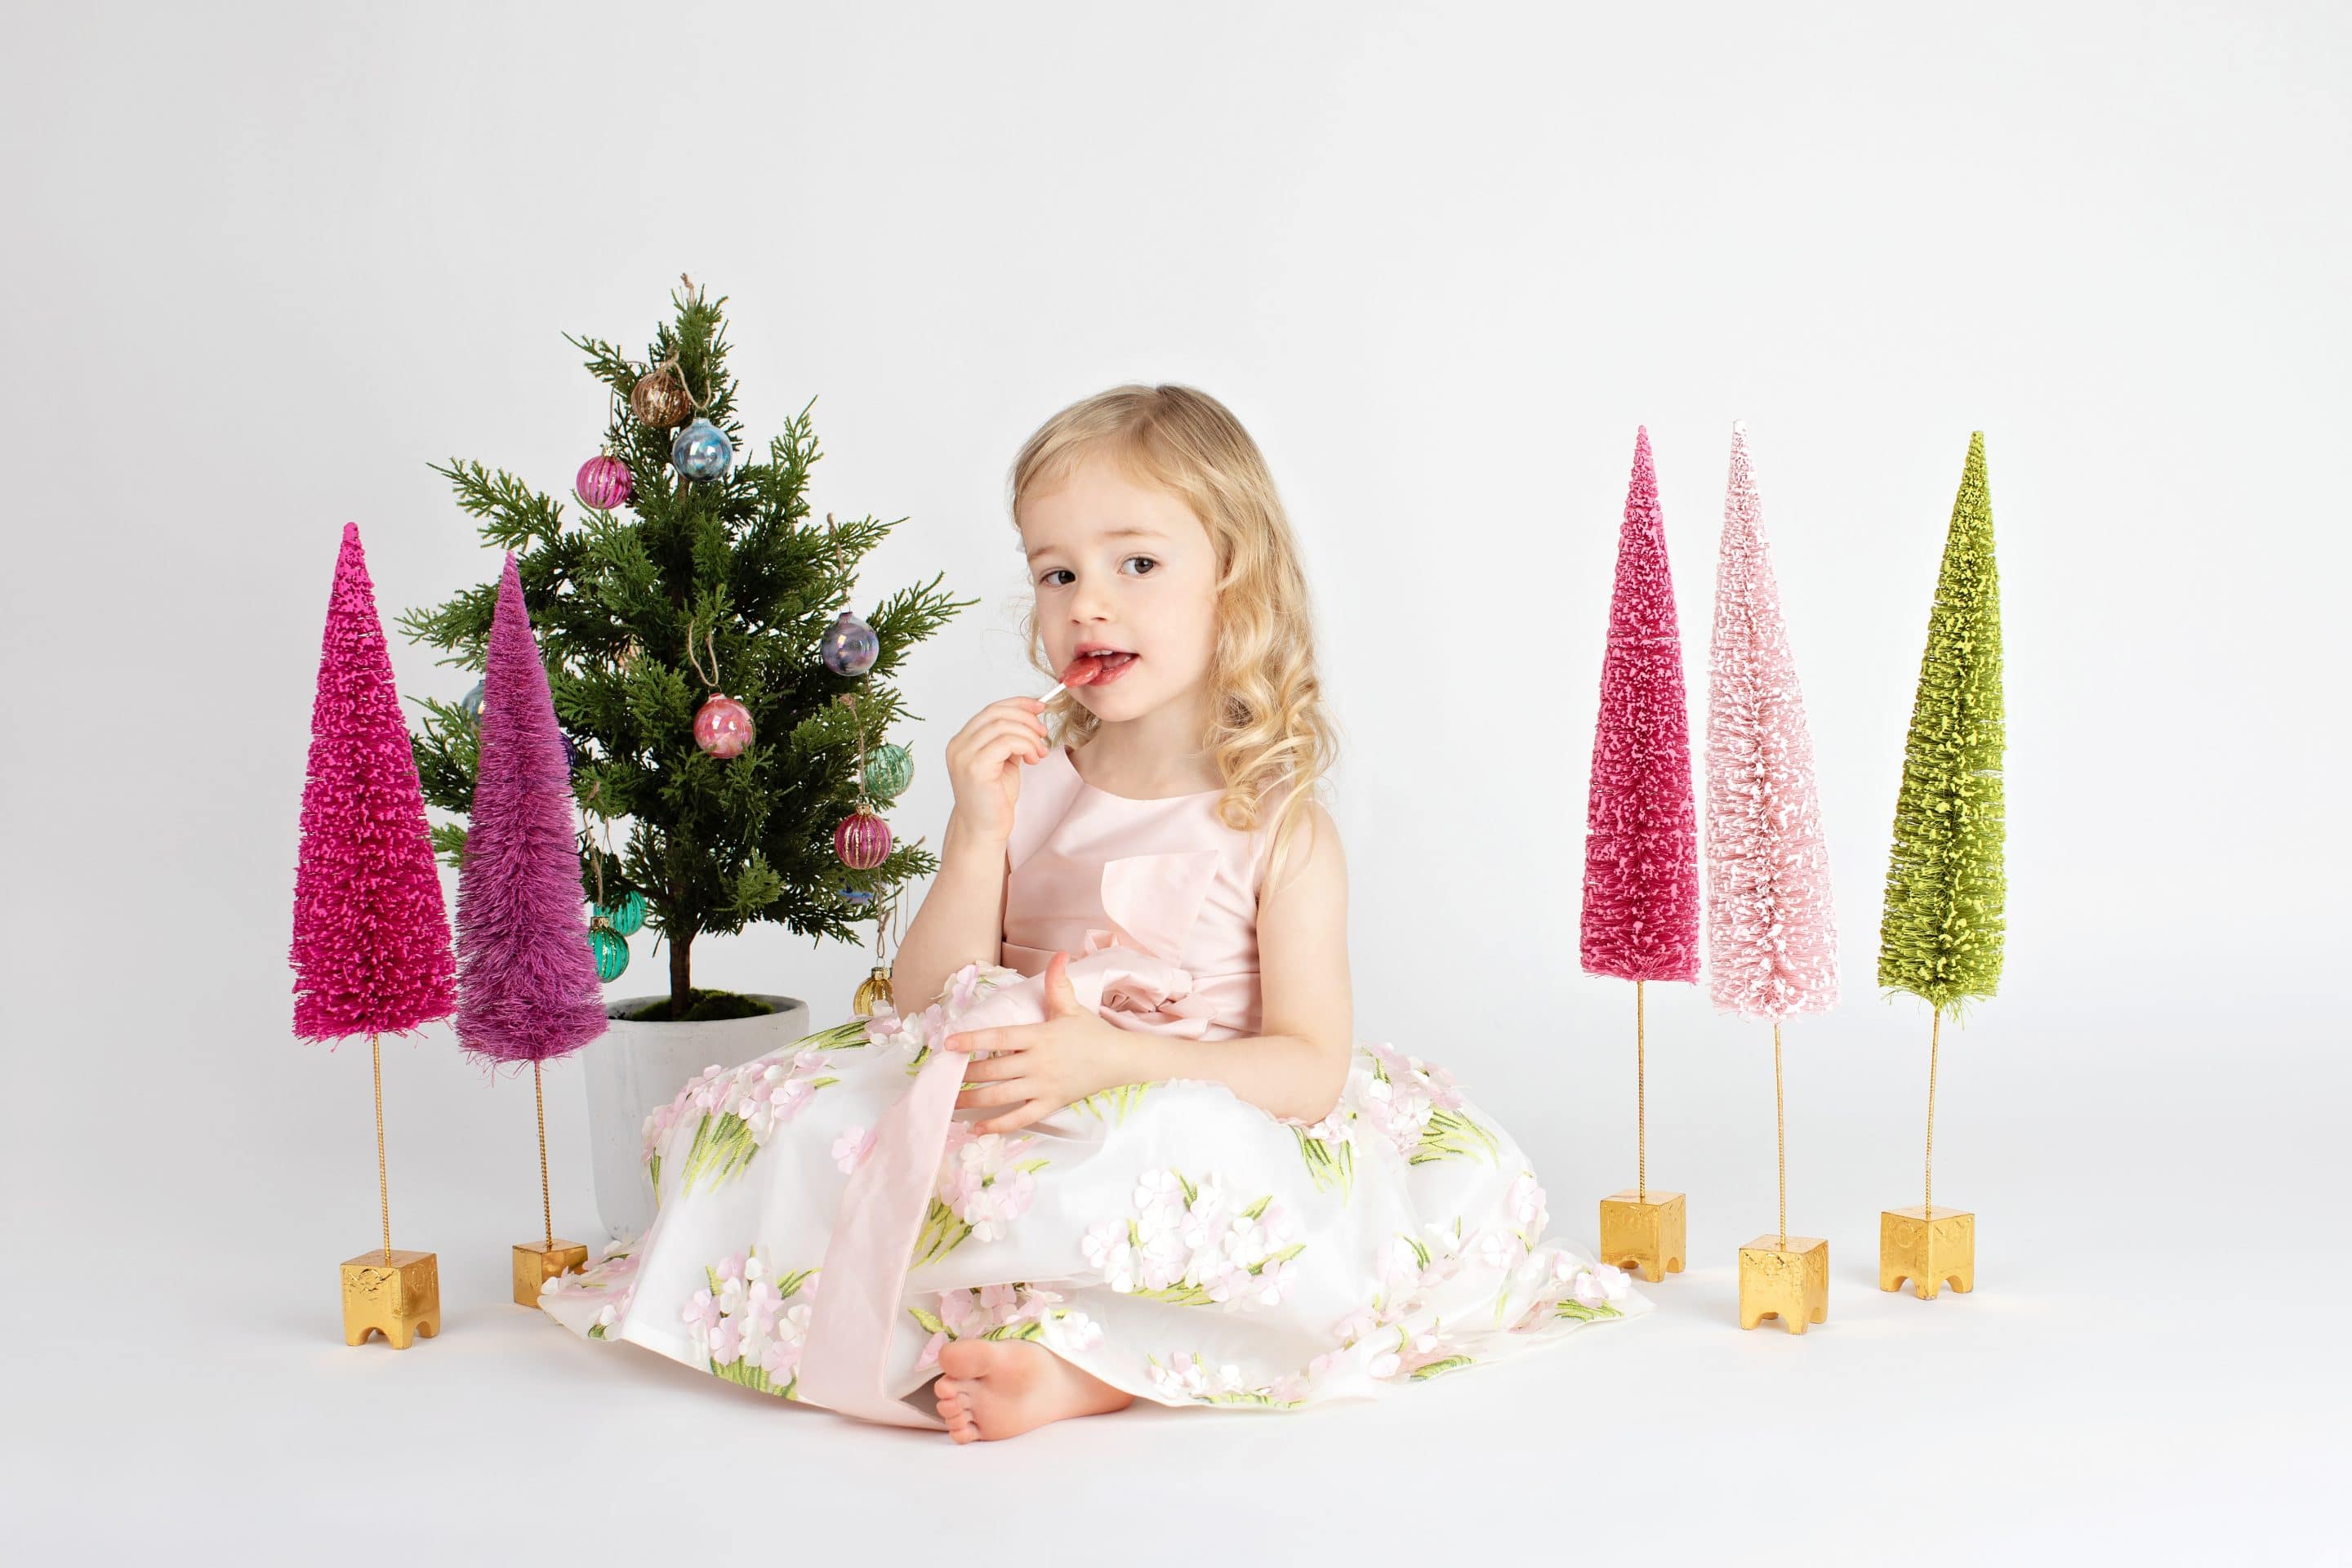 beautiful little girl posing with festive holiday trees